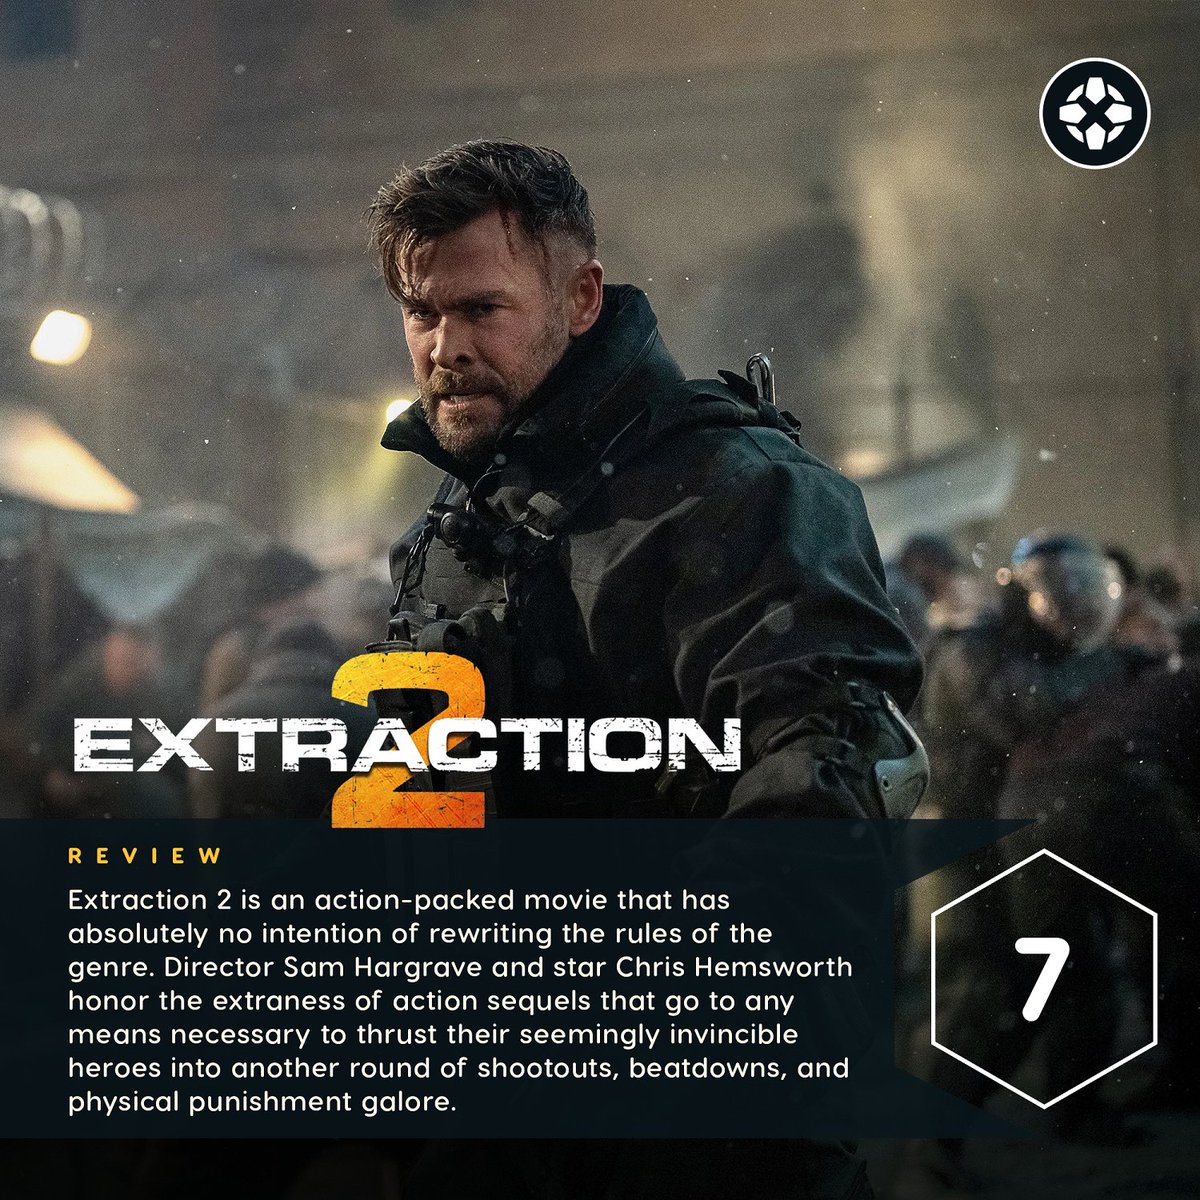 ;;;```movie;;``Still Now Here Option's to Downloading or watching Extraction 2 2023 /streaming the full movie online for free. 

📽️/Streaming/ Link: @E2movielink

Extraction 2 full/movie link
you need to know about Extraction 2
#Extraction2 #Extraction